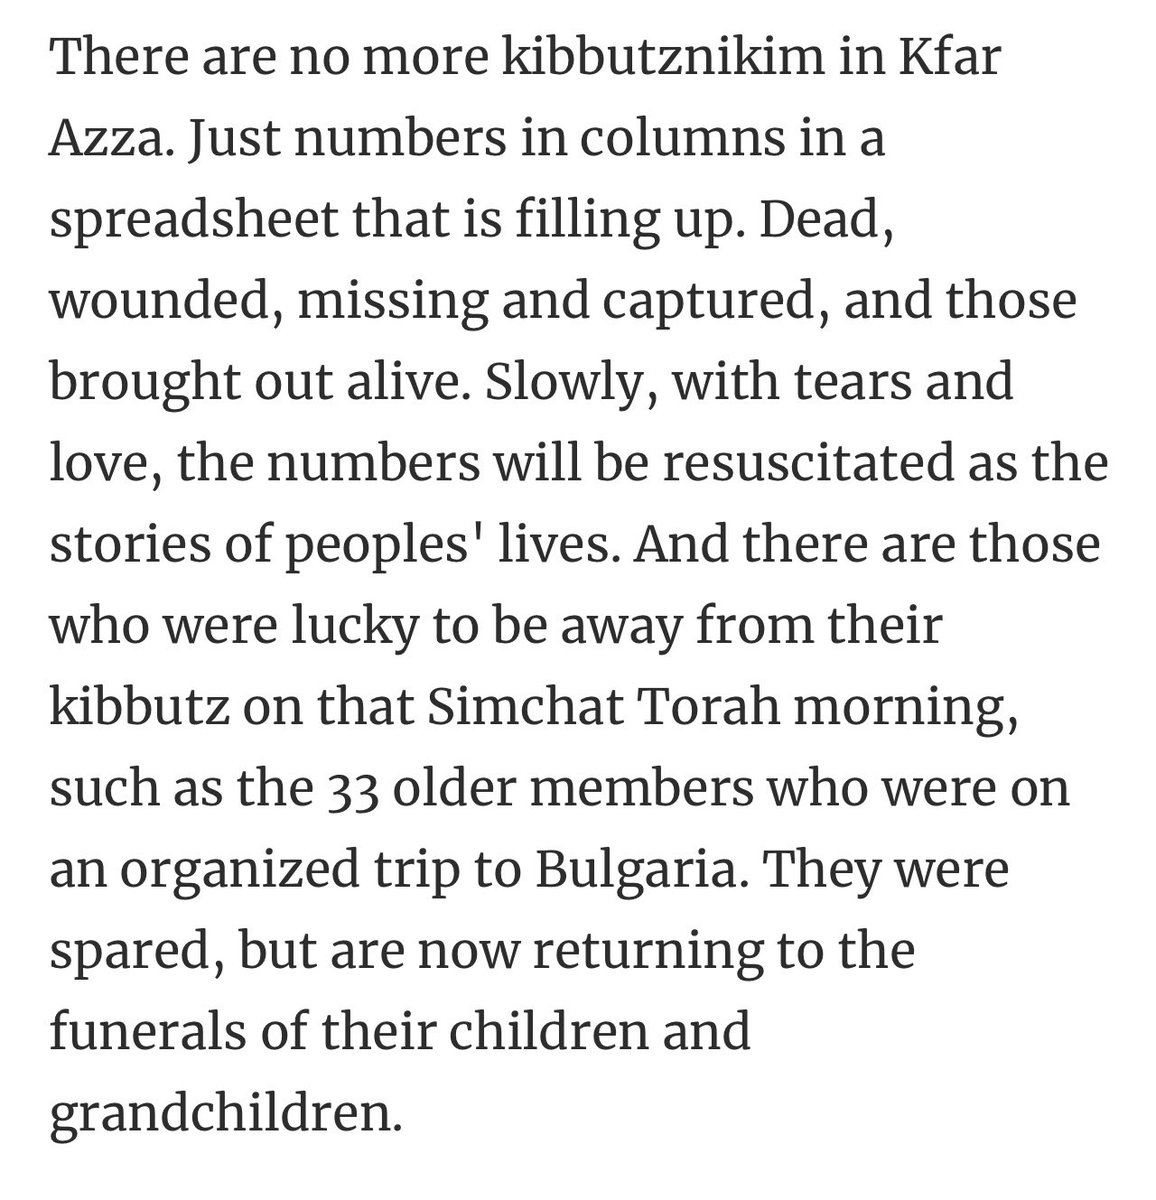 Searing dispatch by @AnshelPfeffer from the site of one of worst massacres this century.